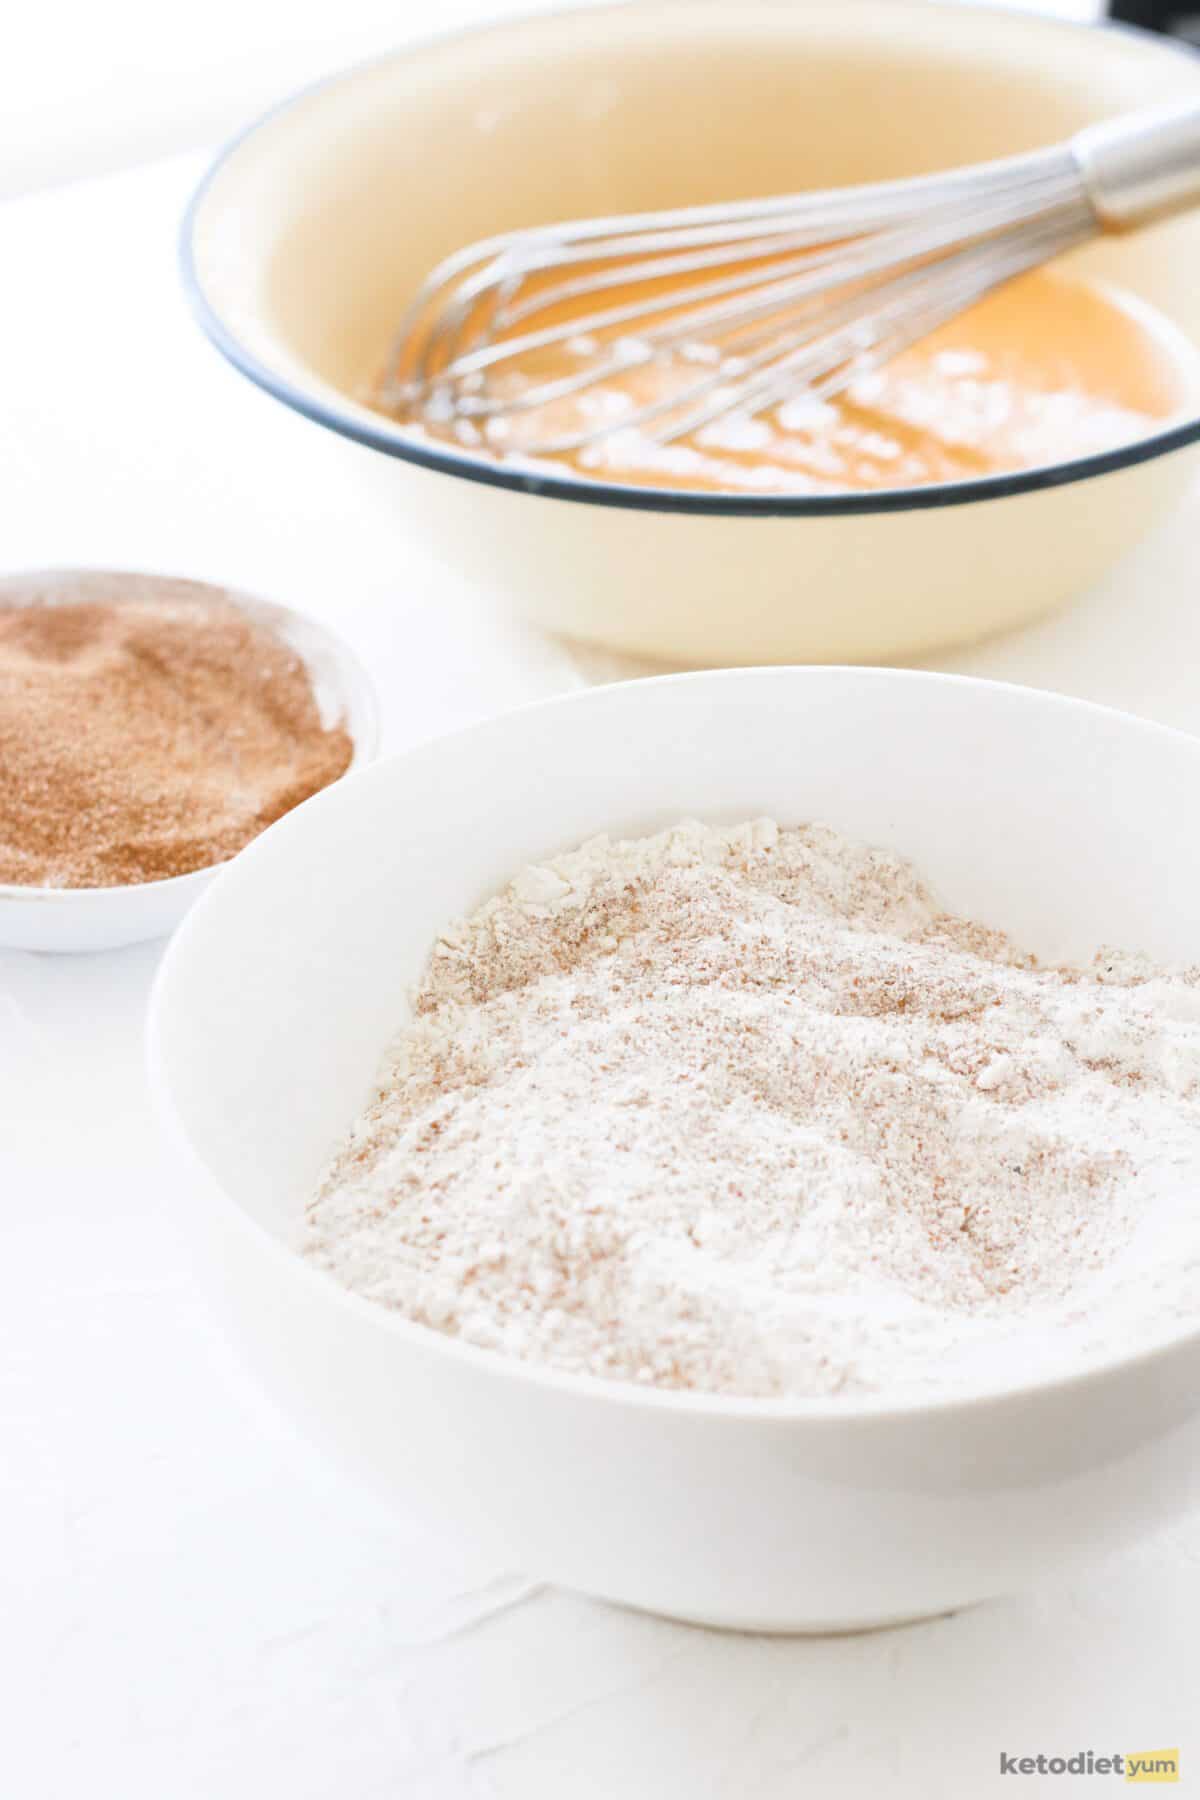 Almond flour, coconut flour, salt, and baking powder combined in a mixing bowl